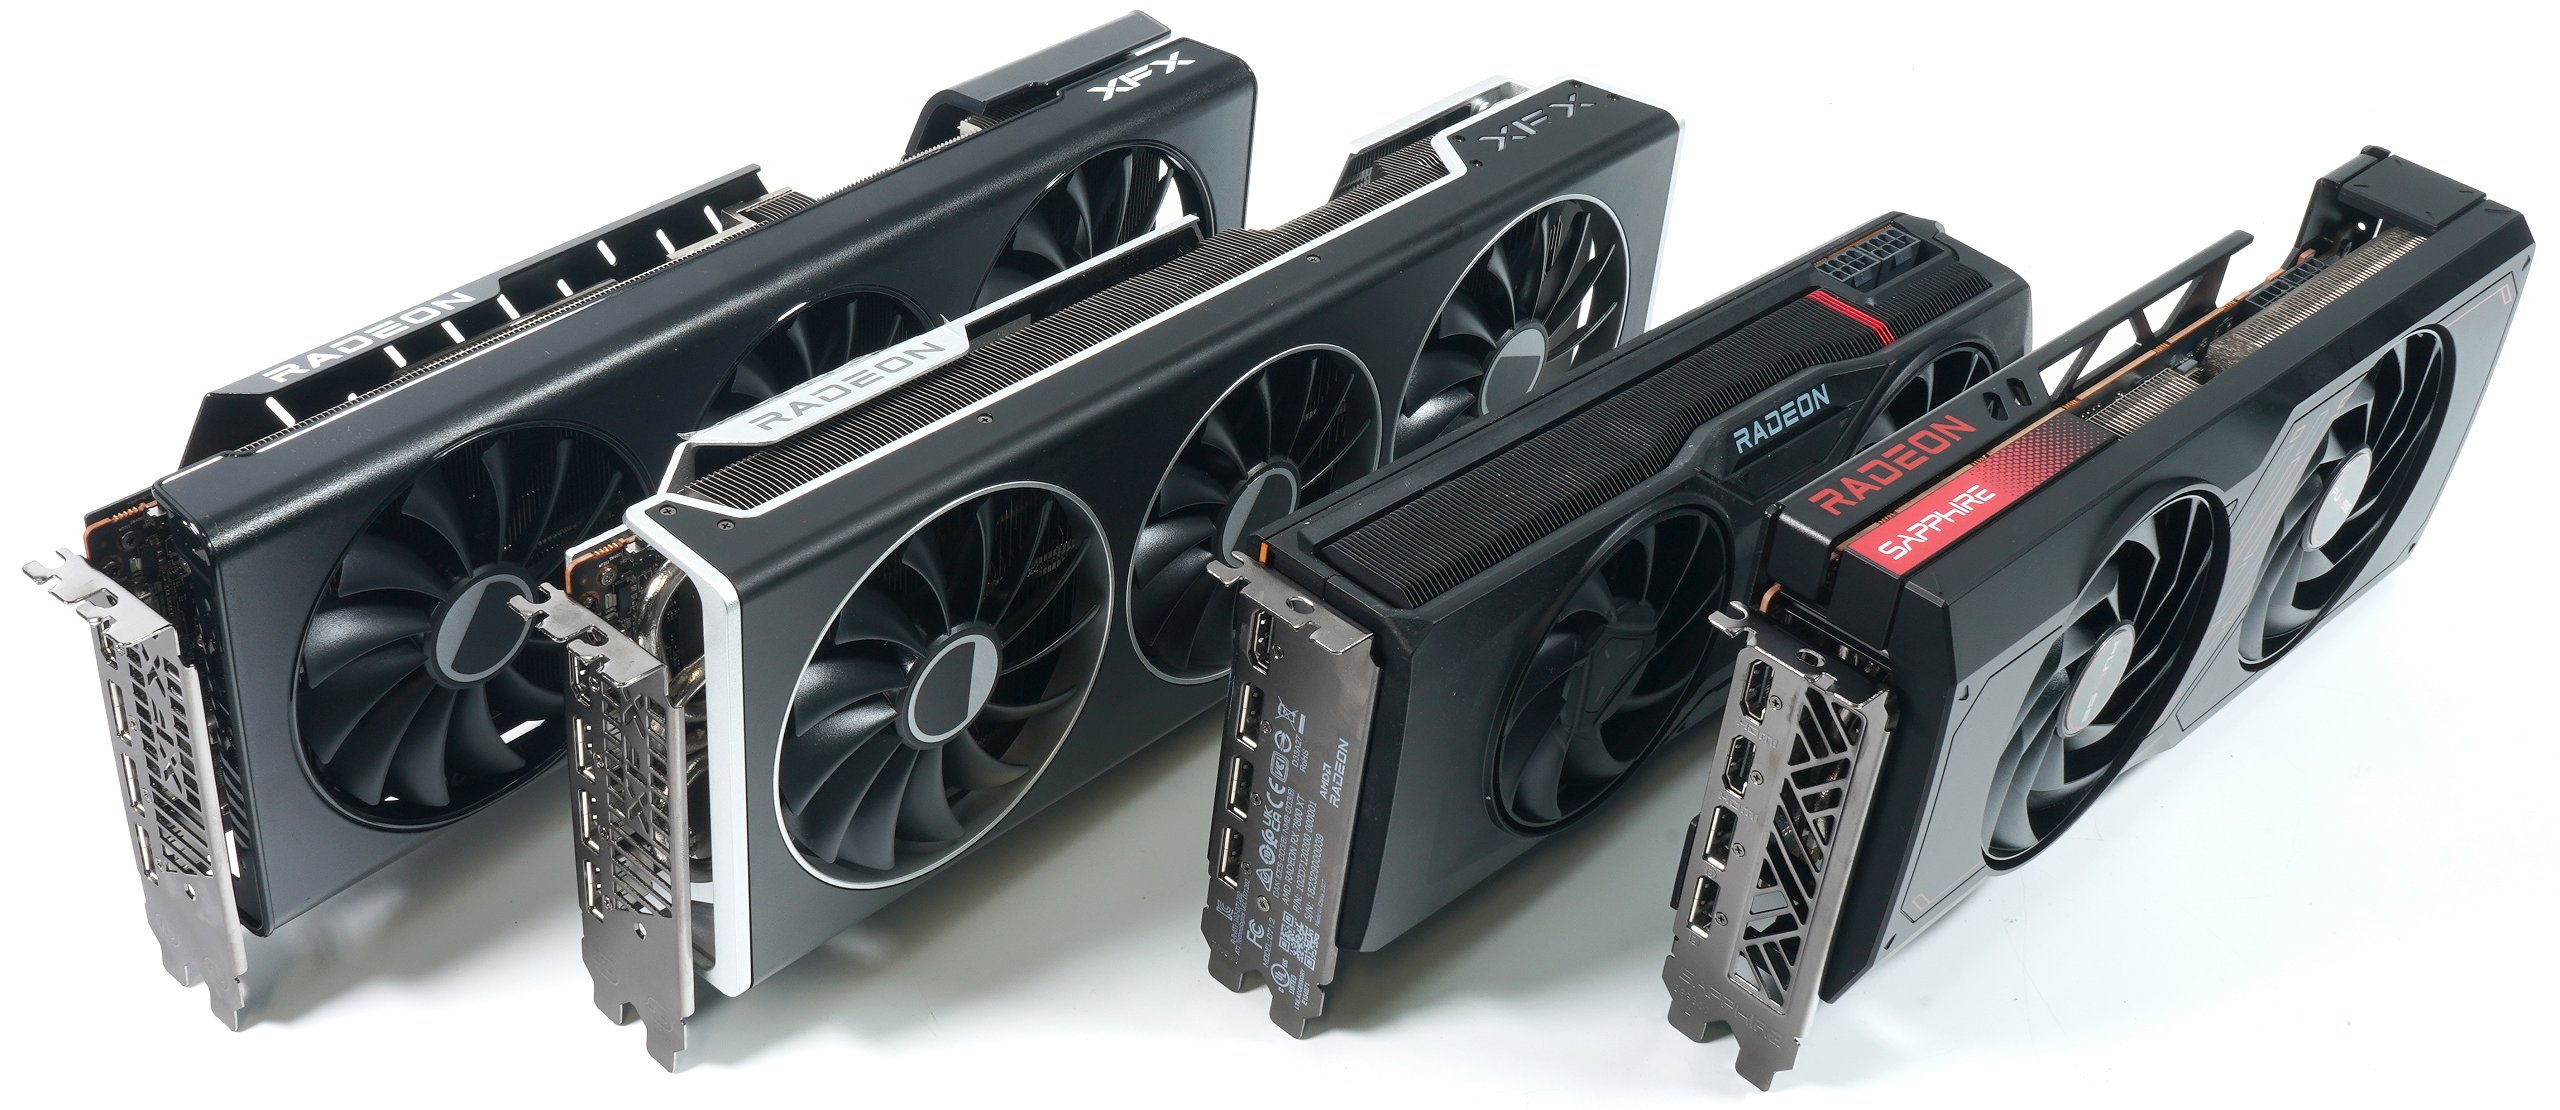 Radeon RX 7800XT and RX 7700XT Review - AMD, XFX and Sapphire